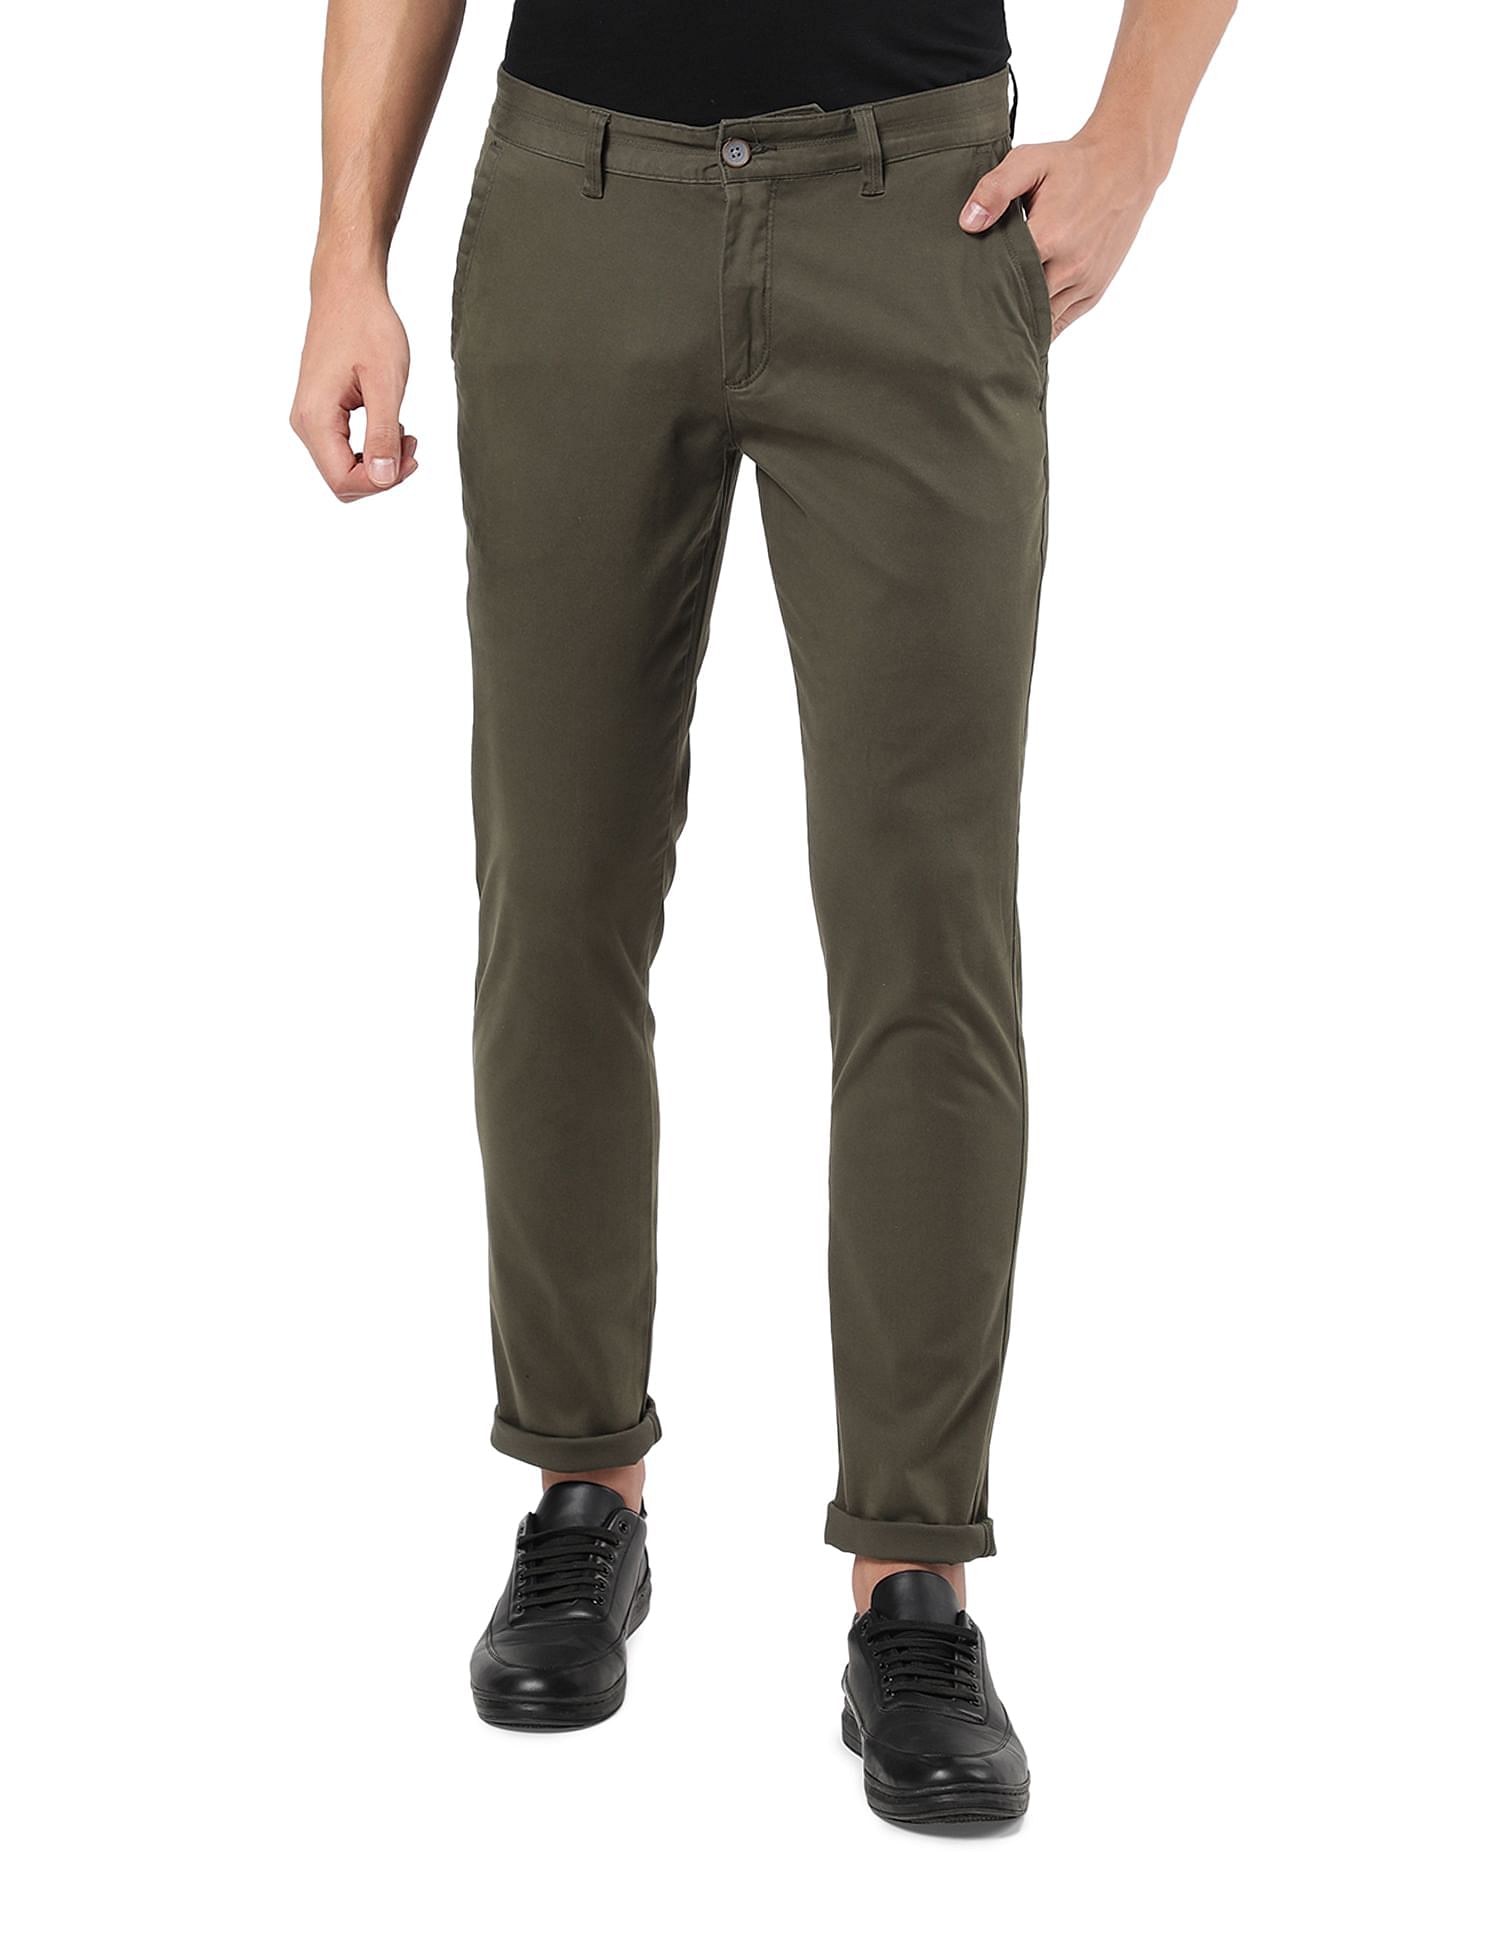 Buy Grey Trousers & Pants for Men by COOL COLORS Online | Ajio.com